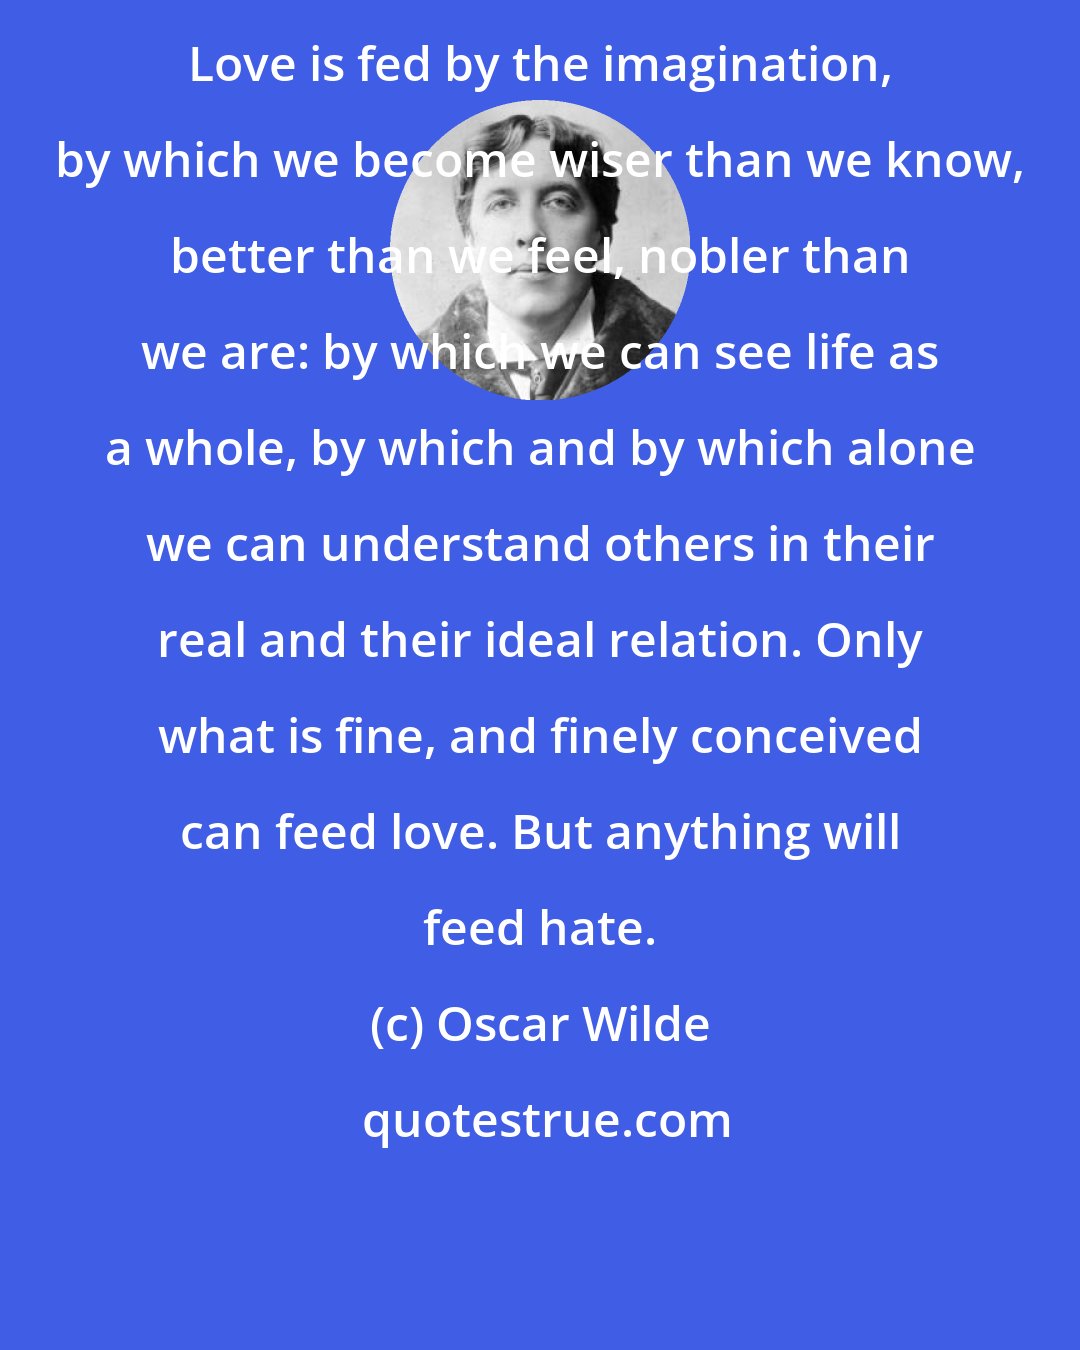 Oscar Wilde: Love is fed by the imagination, by which we become wiser than we know, better than we feel, nobler than we are: by which we can see life as a whole, by which and by which alone we can understand others in their real and their ideal relation. Only what is fine, and finely conceived can feed love. But anything will feed hate.